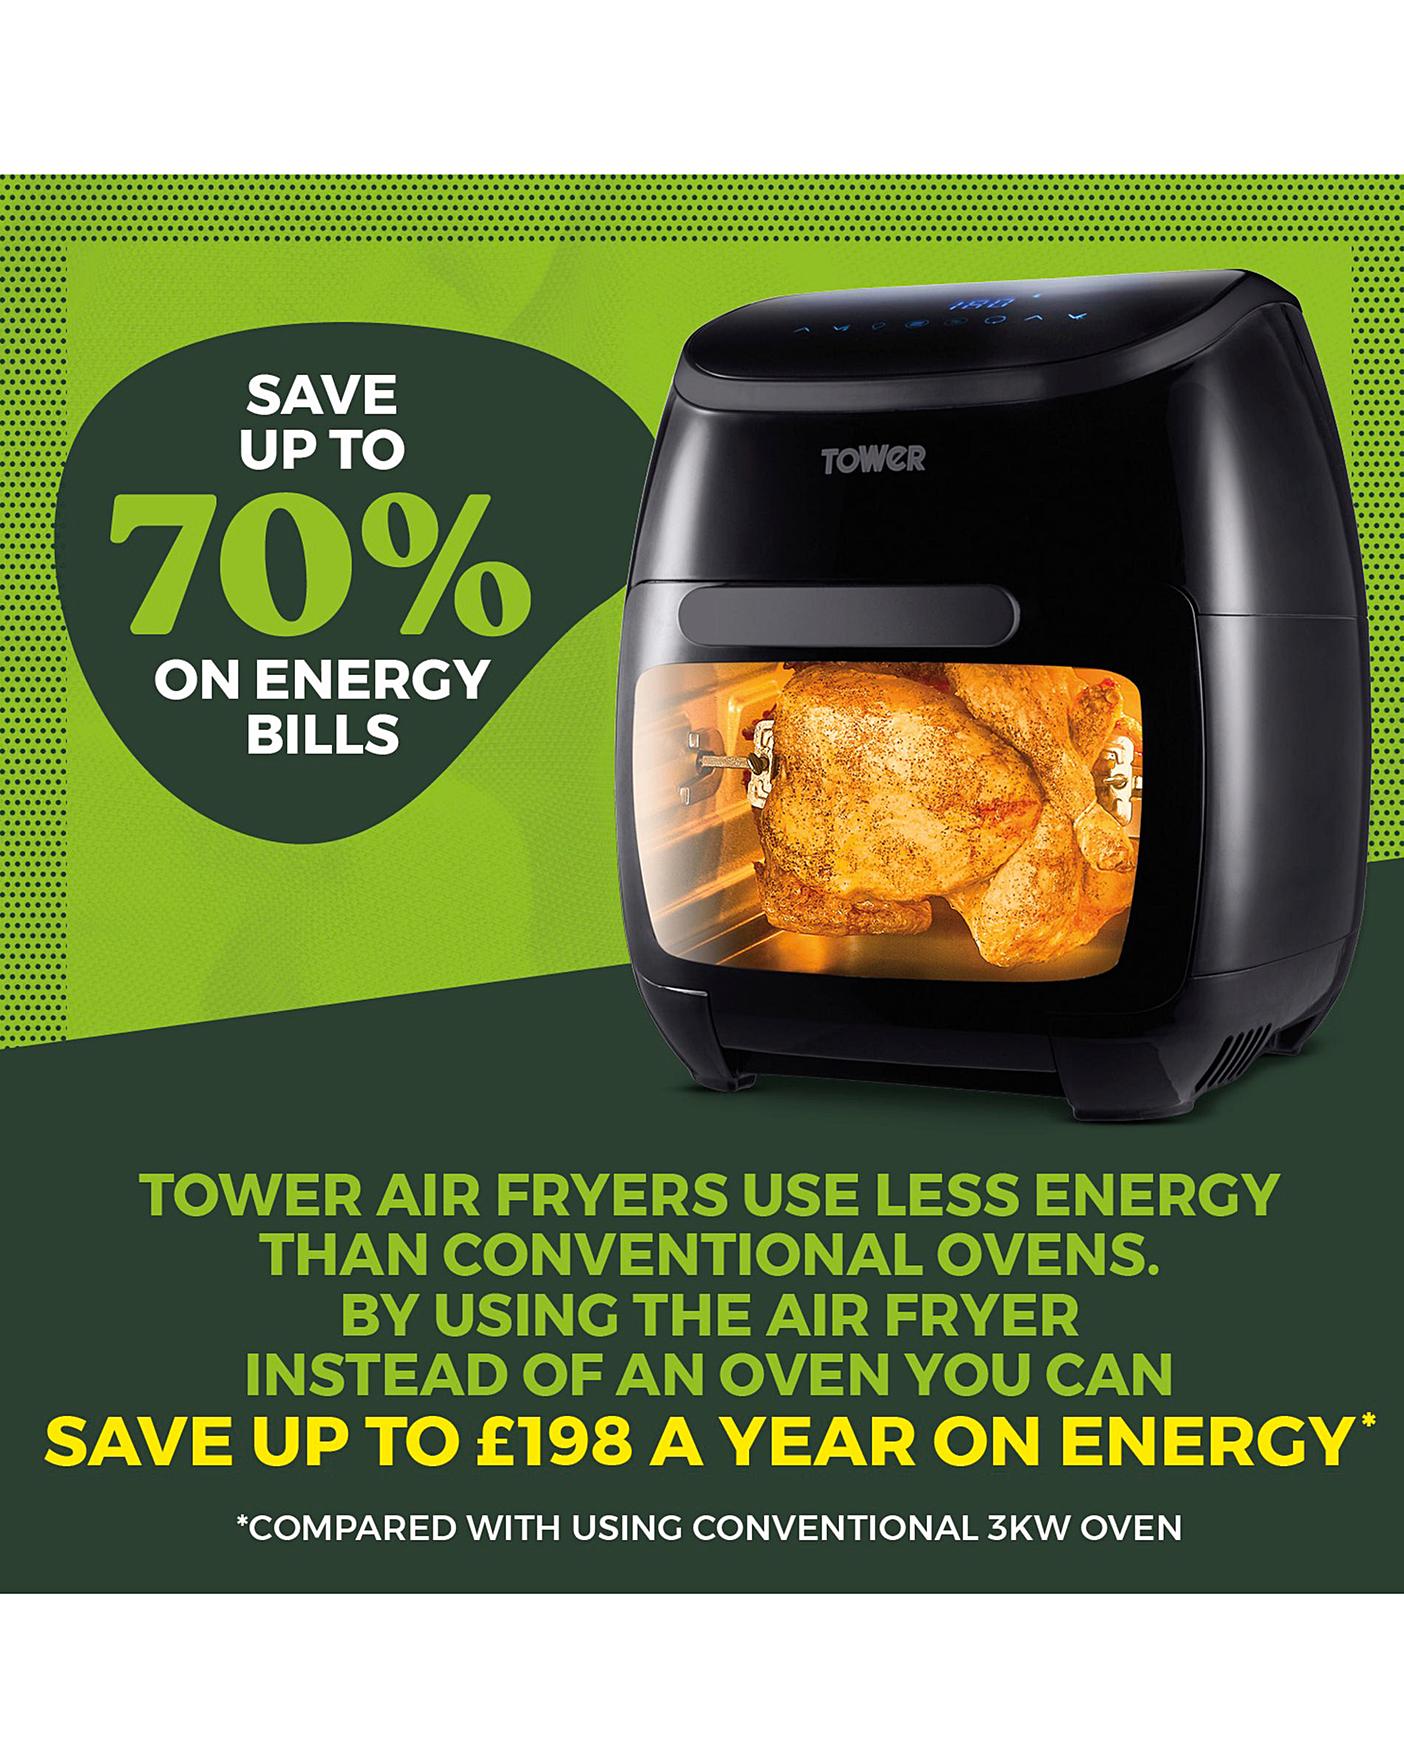 Tower 5-in-1 11 Litre Air Fryer Oven with Rotisserie